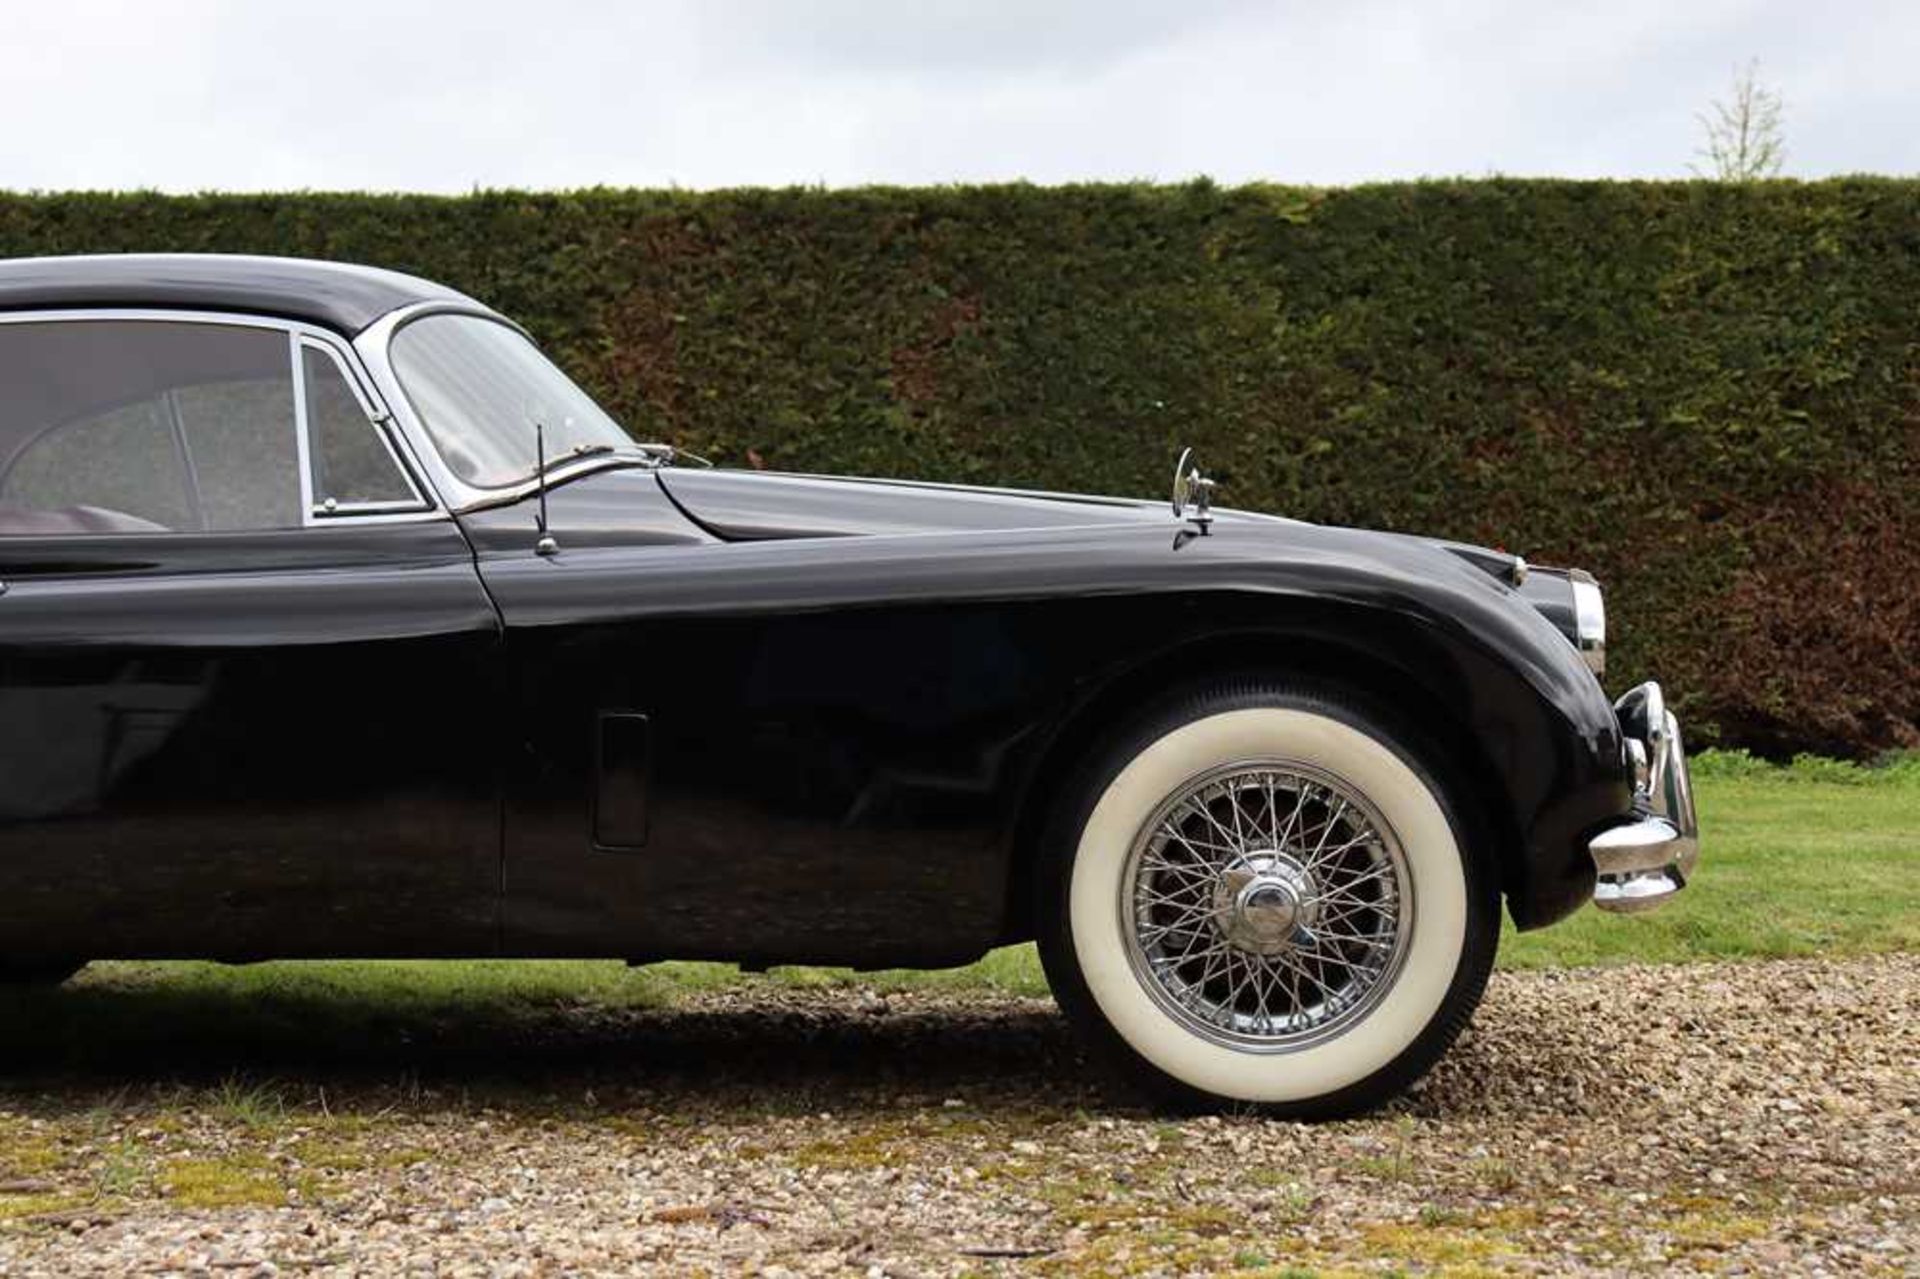 1959 Jaguar XK 150 Fixed Head Coupe 1 of just 1,368 RHD examples made - Image 39 of 49